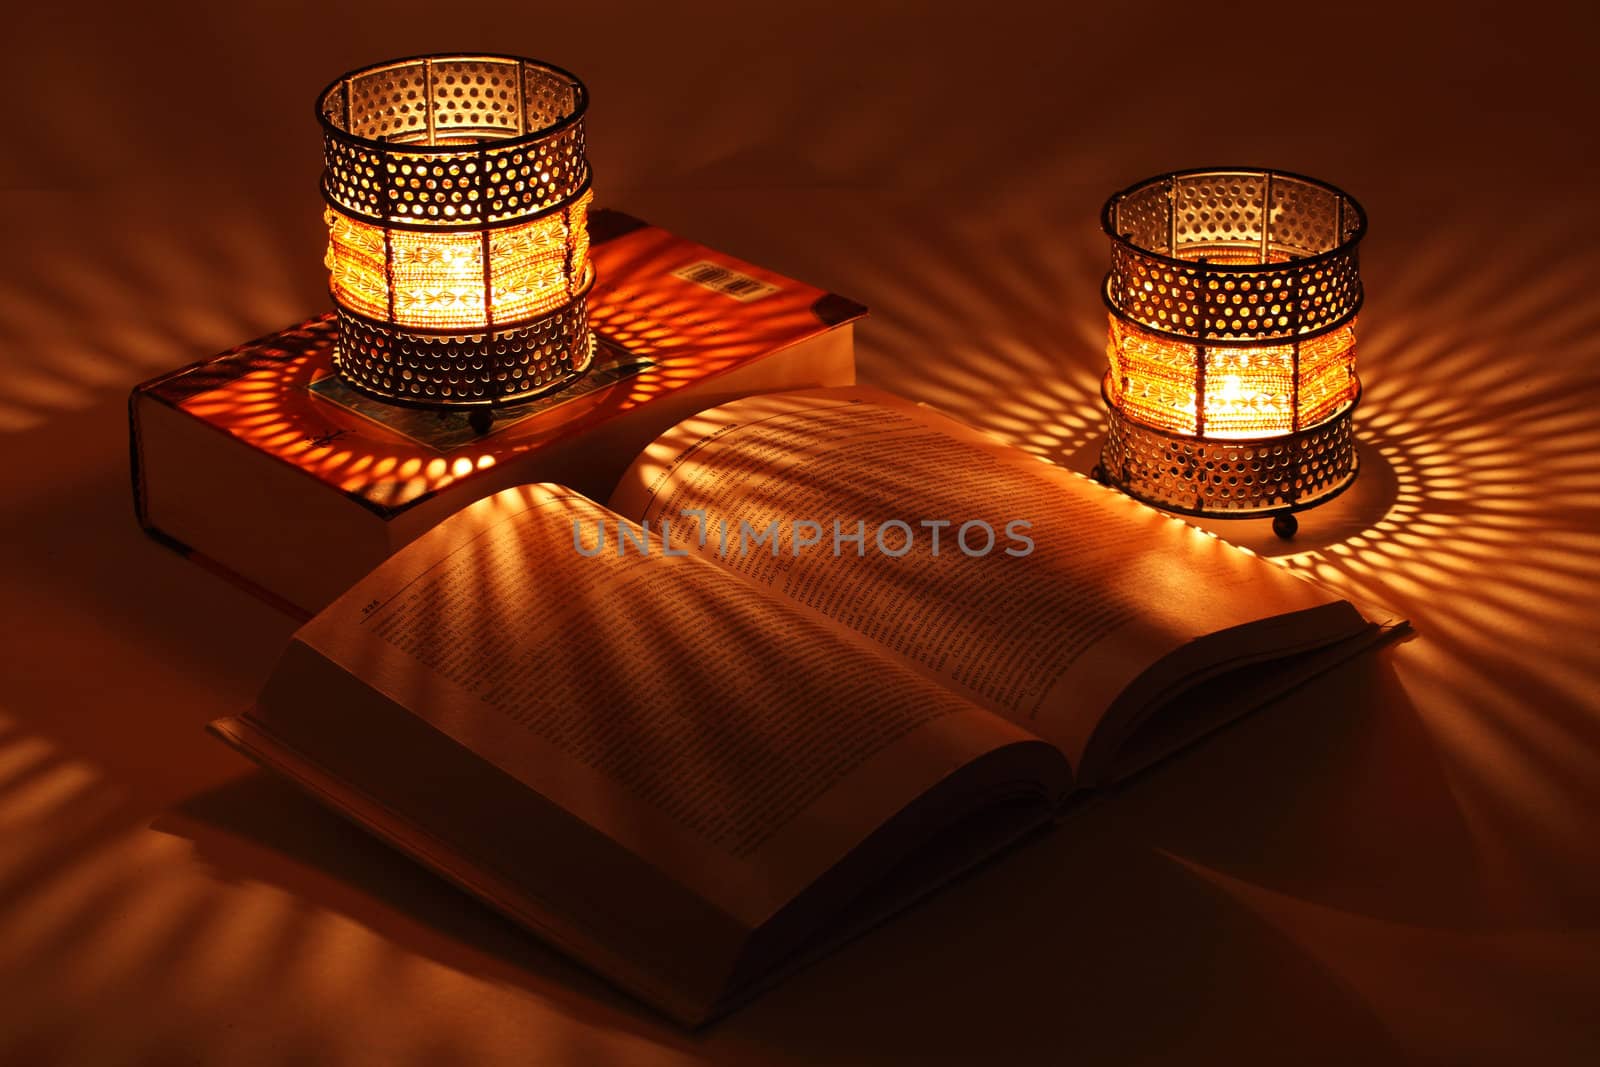 Two old-style candlesticks with flaming candle inside, one on big book and one open book in the dark